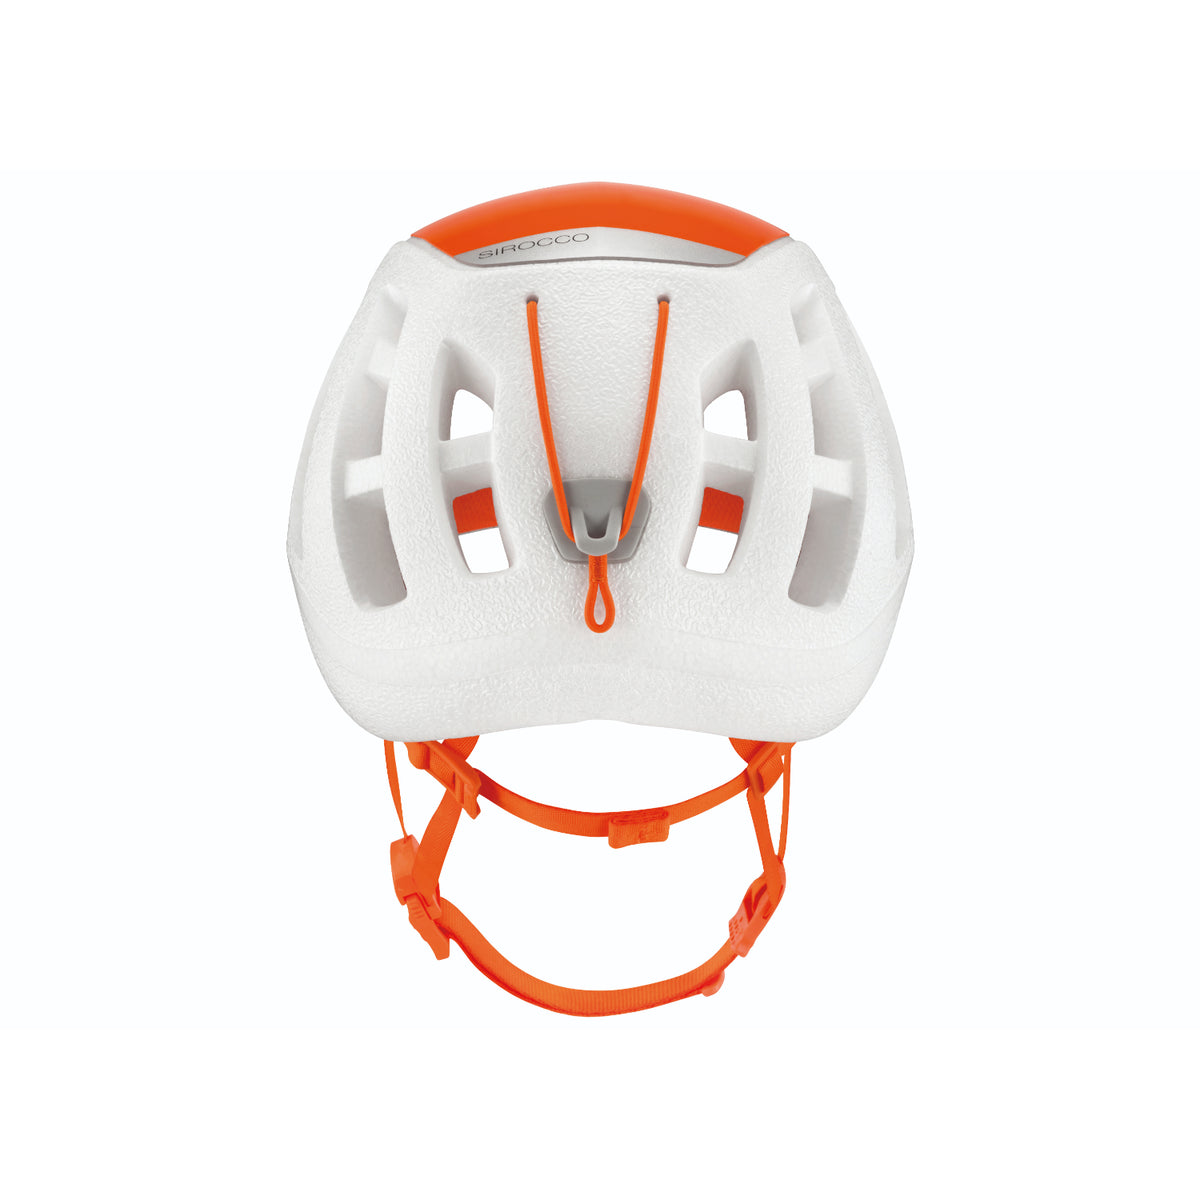 Petzl Sirocco in white and orange showing the rear